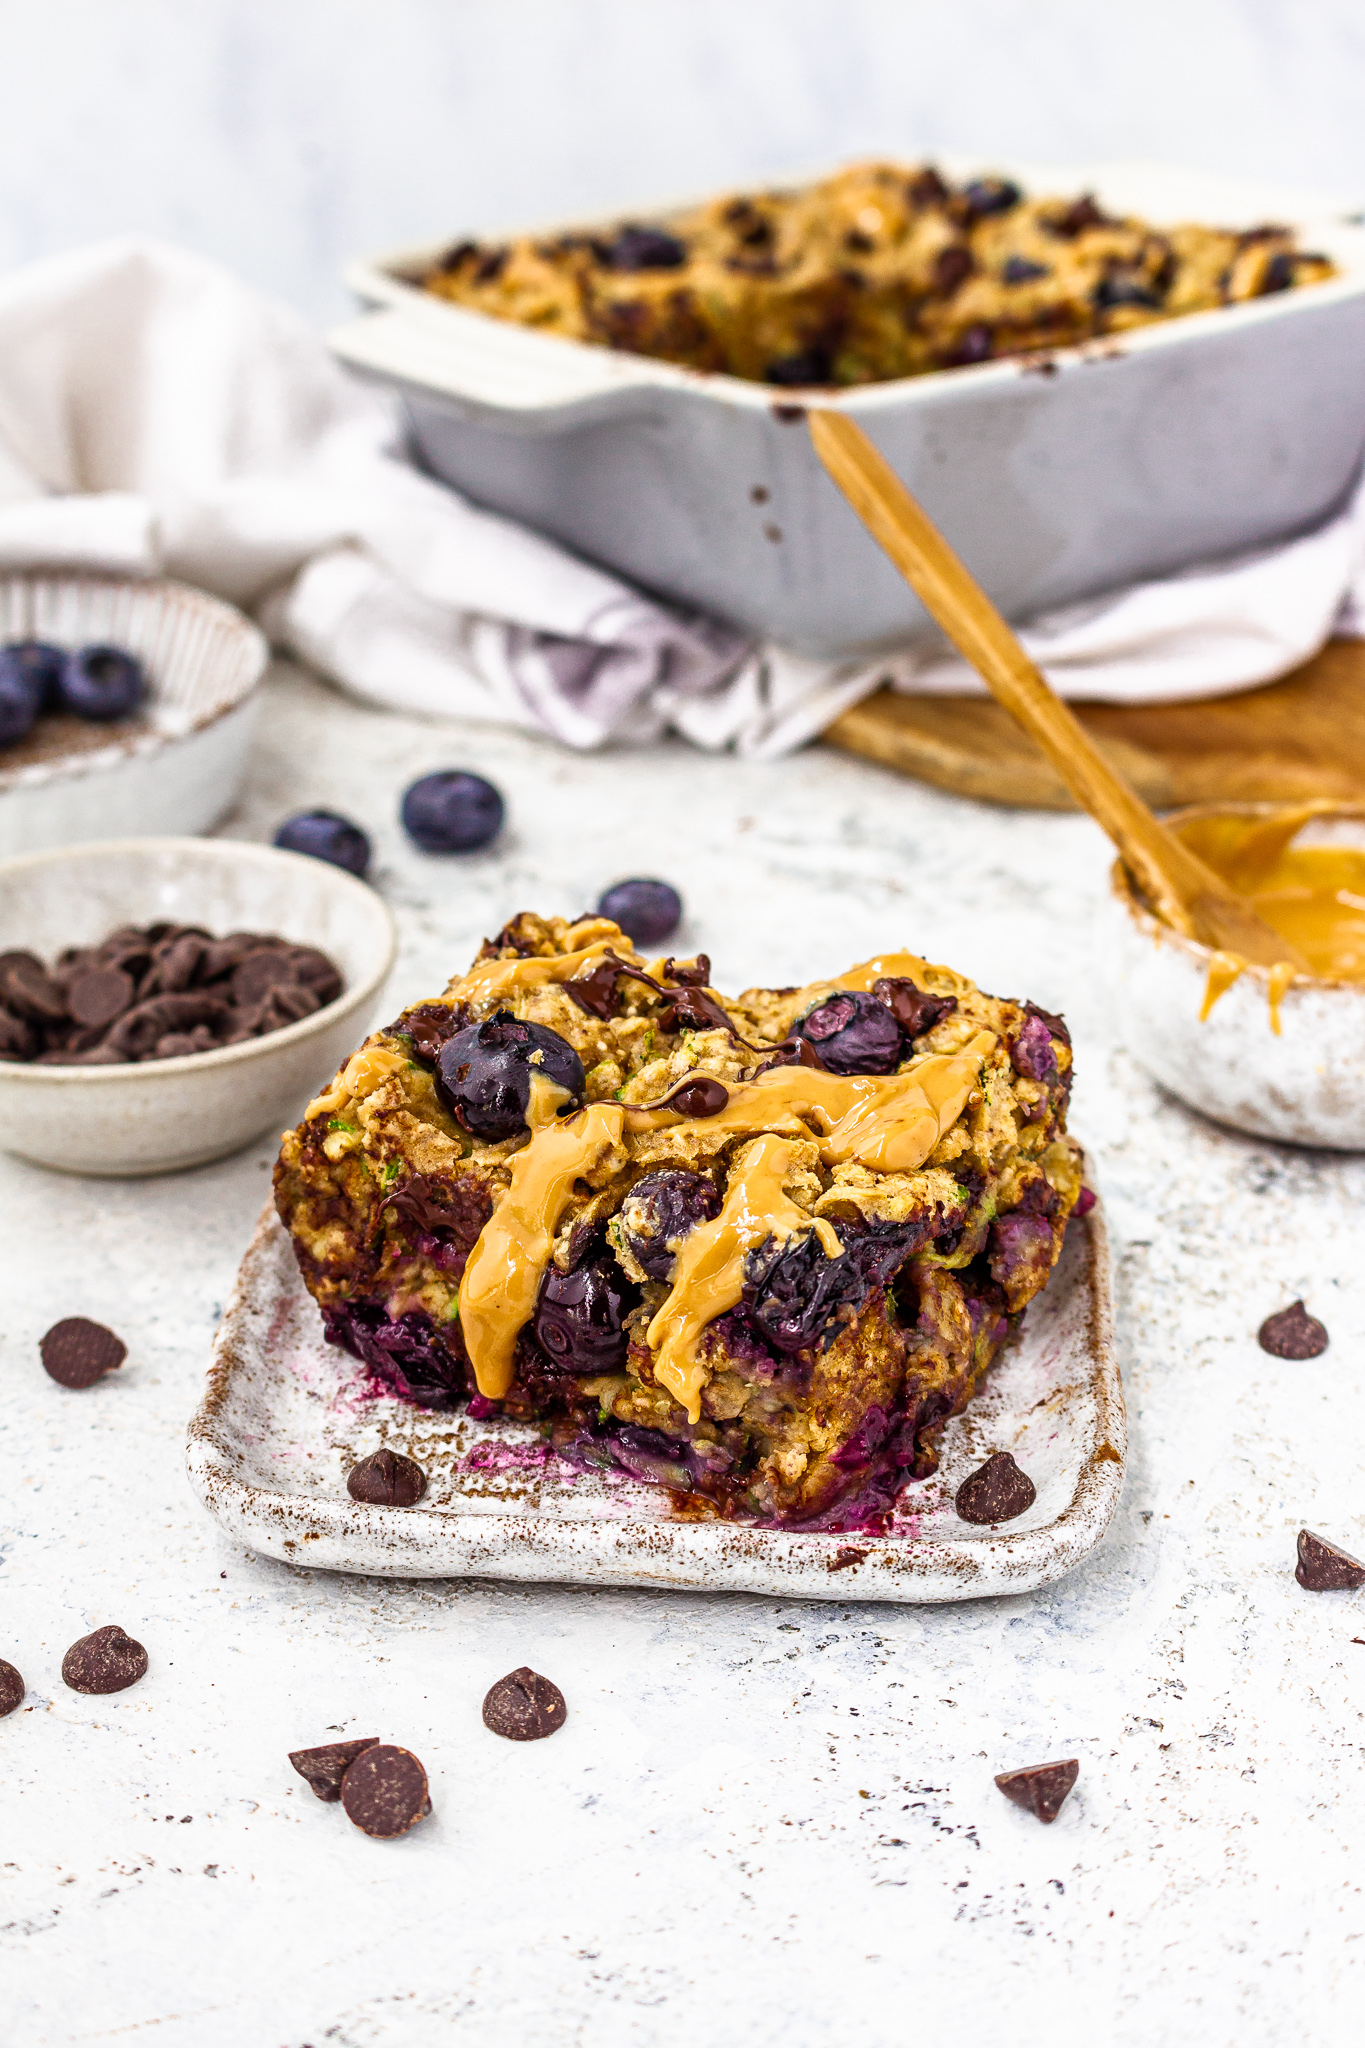 Peanut Butter Blueberry Chocolate Chip Courgette Baked Oats